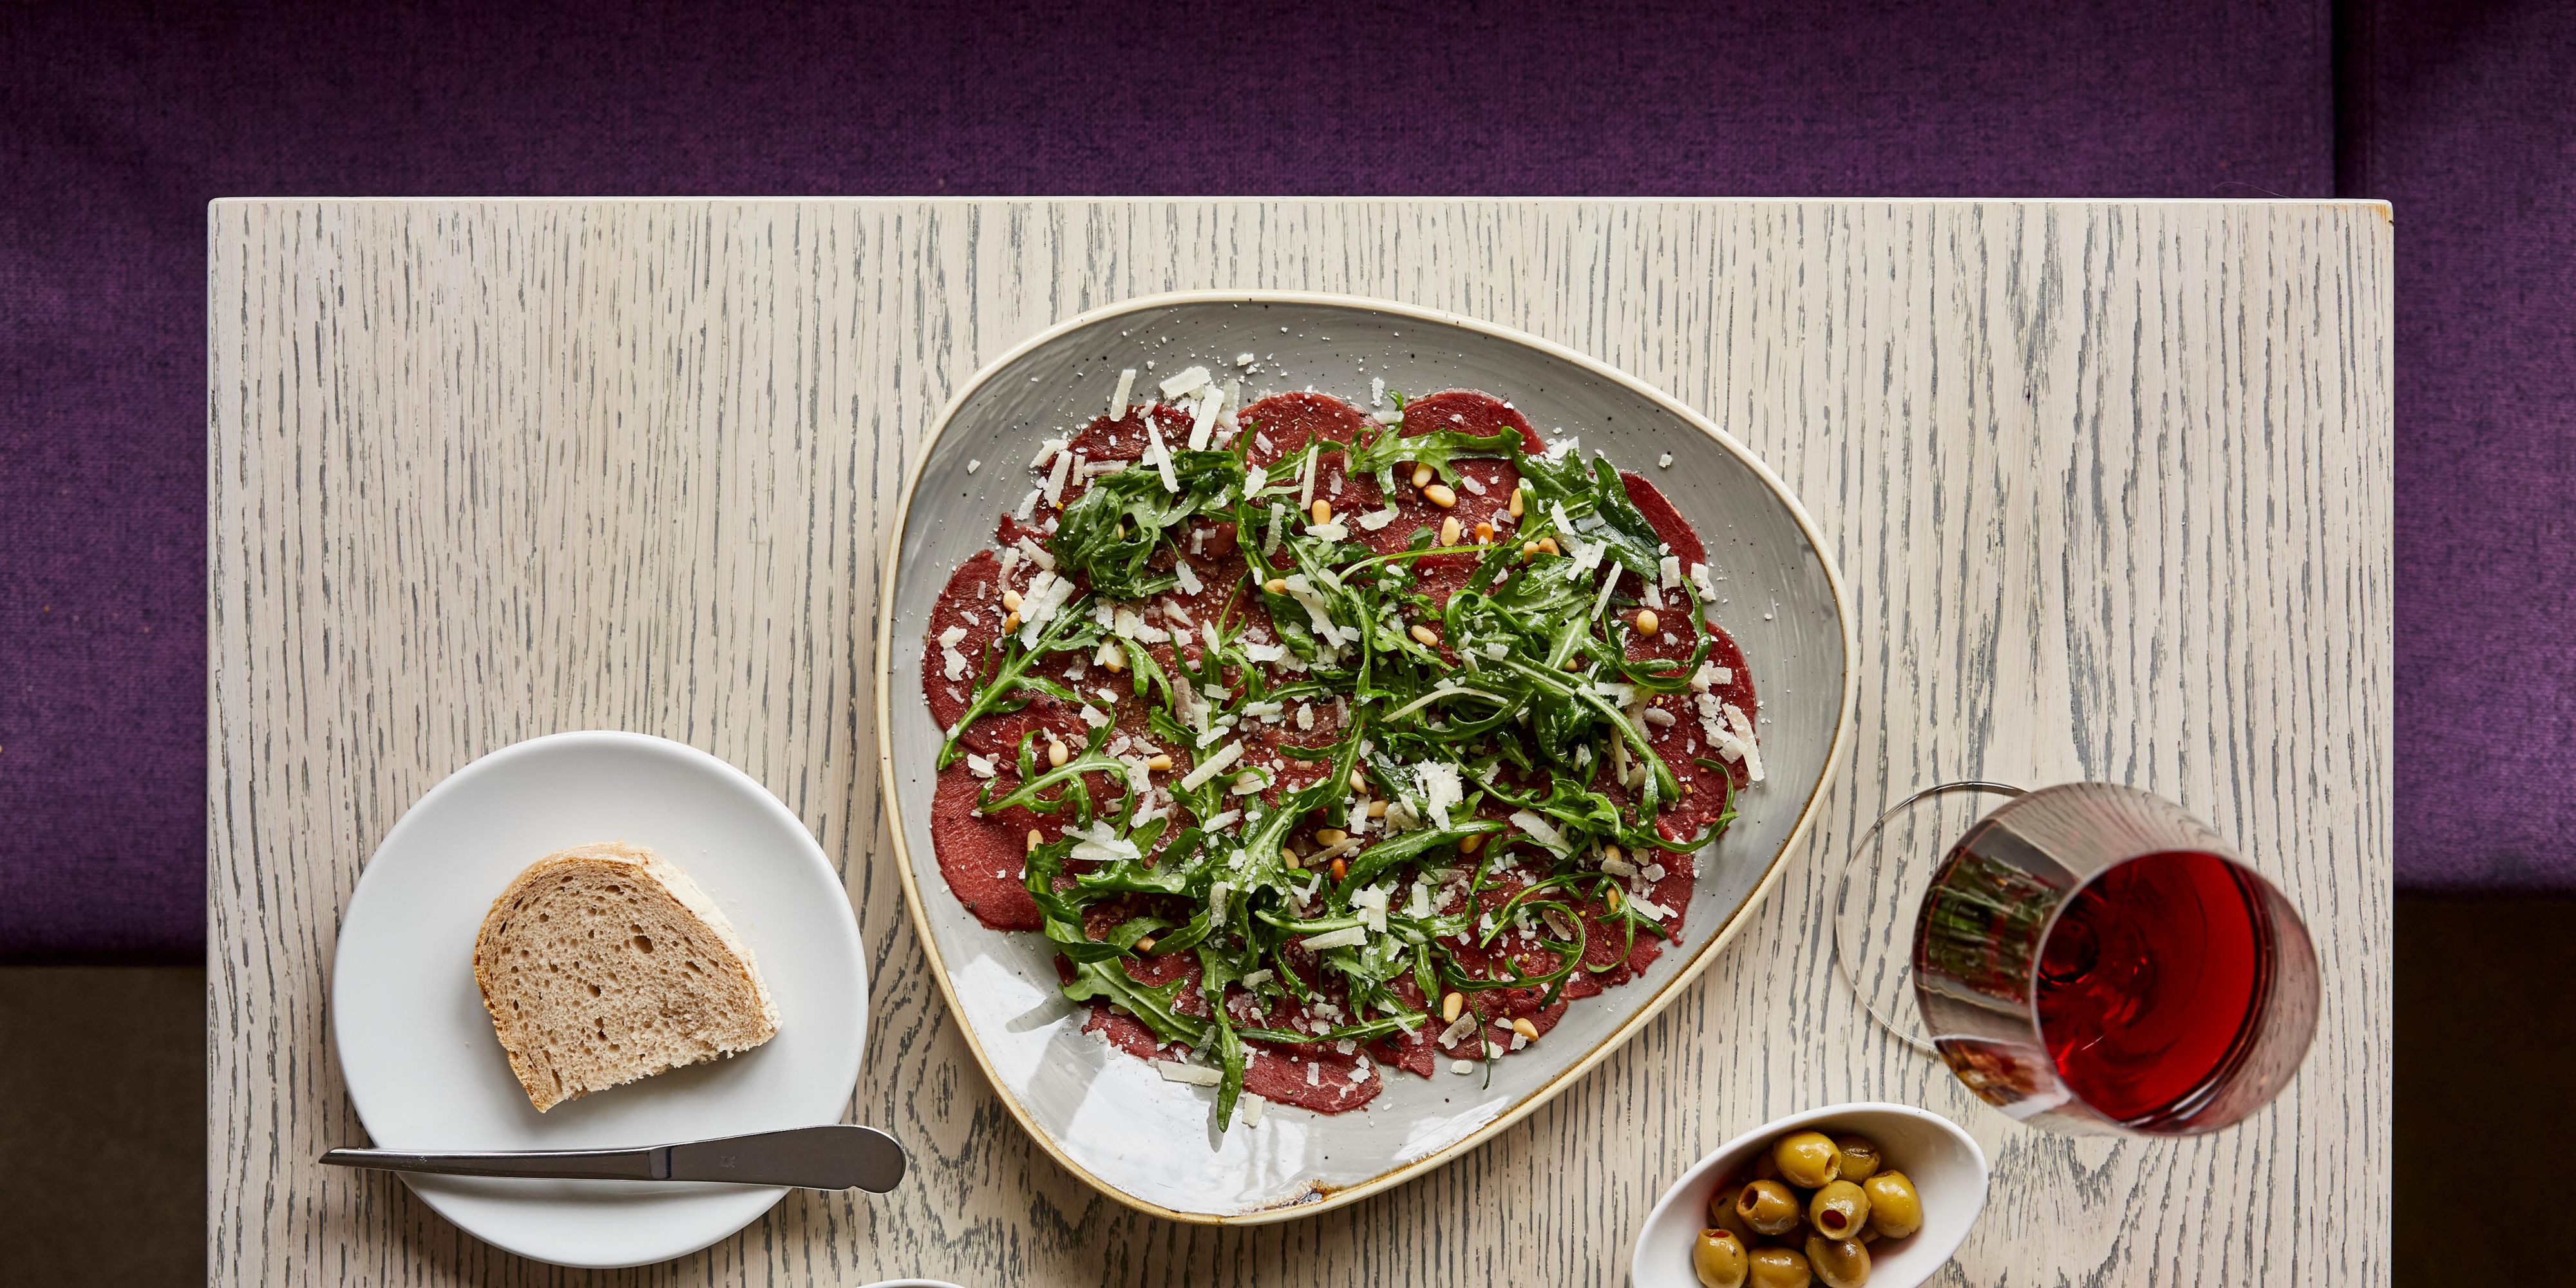 A tasty dish of beef carpaccio, with a glass of red wine. 